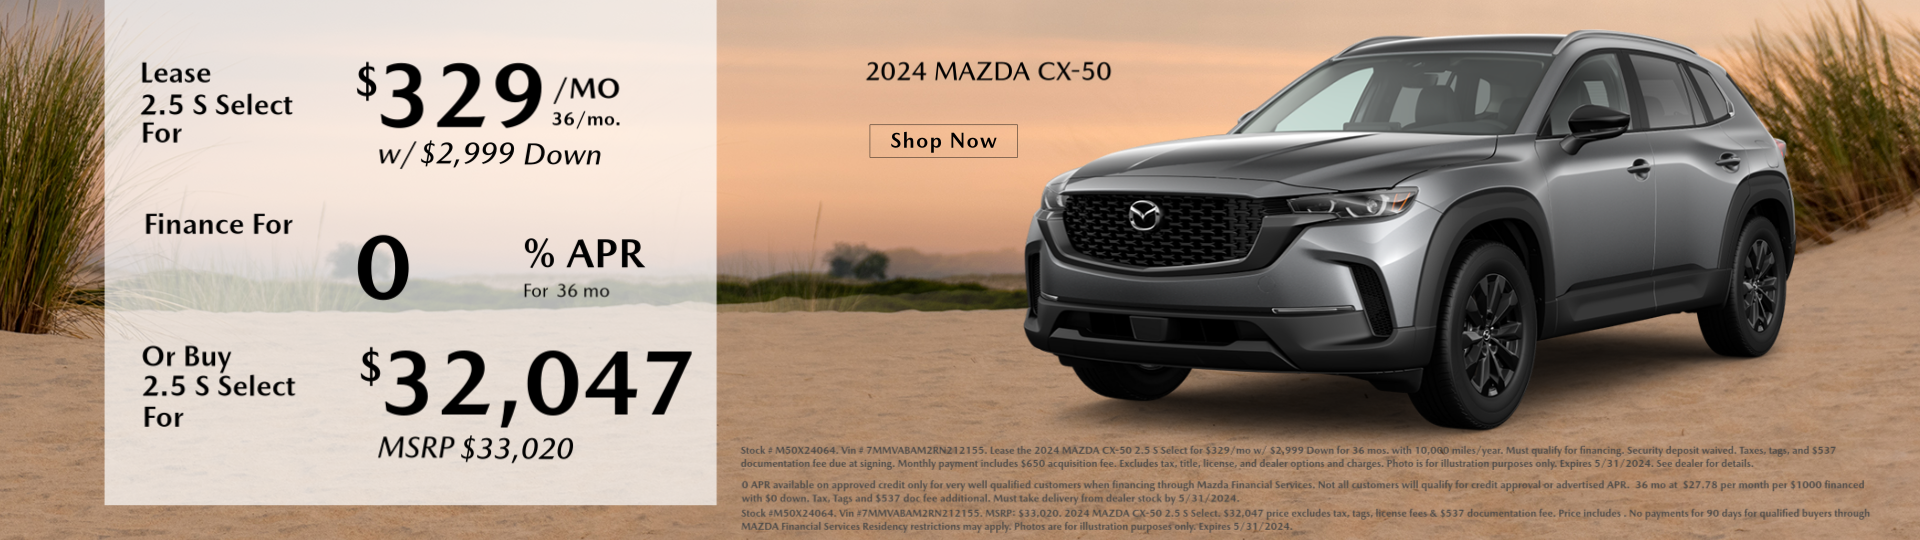 Don't miss our New MAZDA CX-50 Offers at Chapman Mazda New Jersey!